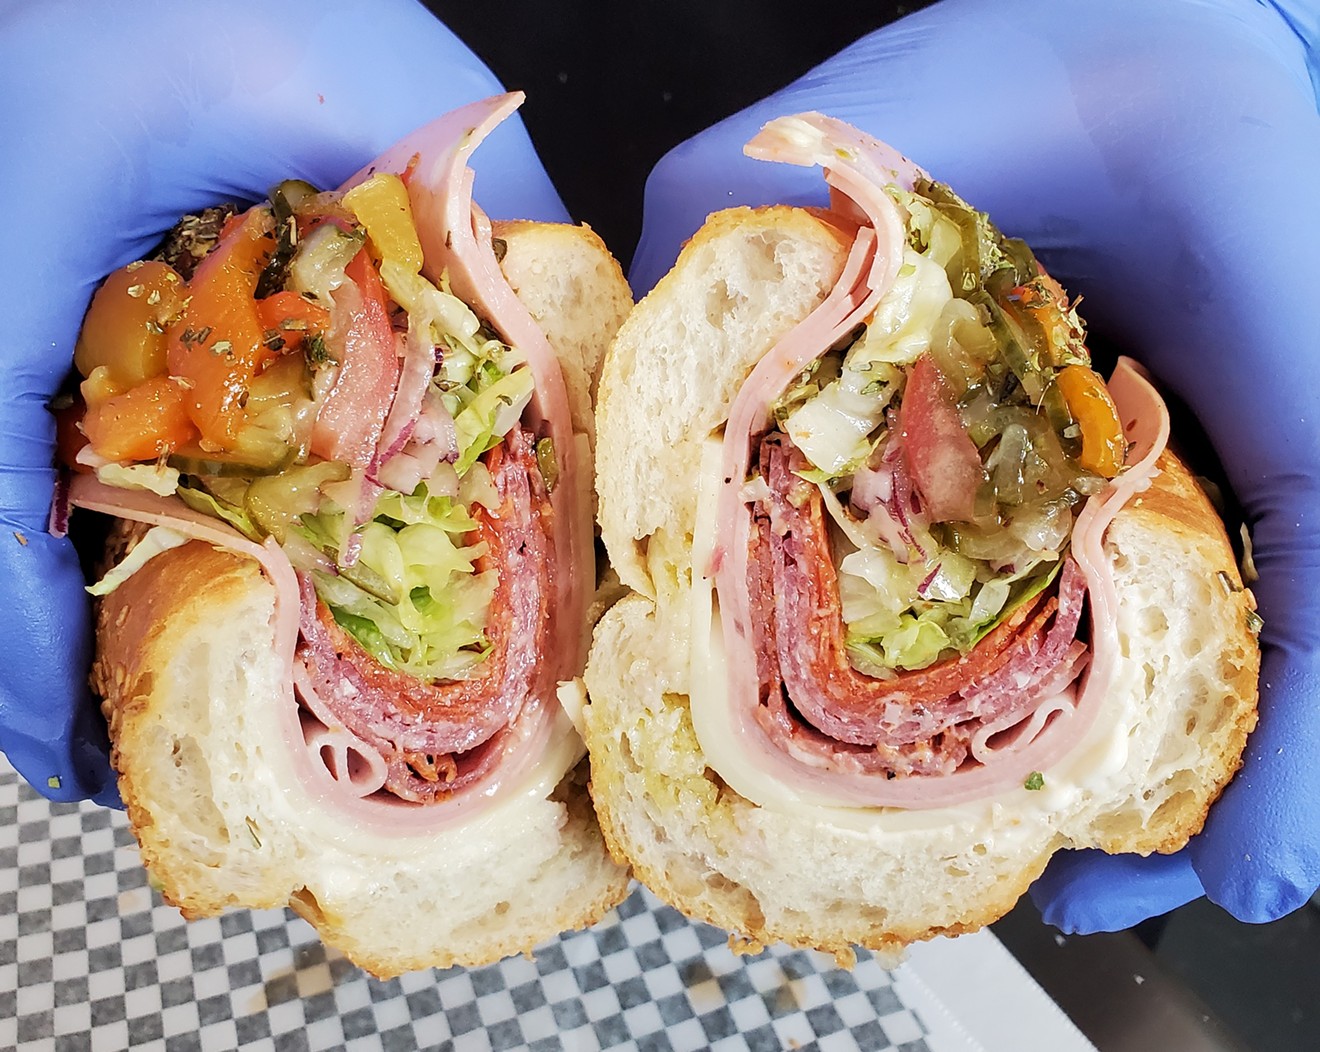 The classic Italian from Little Arthur's, fully loaded.